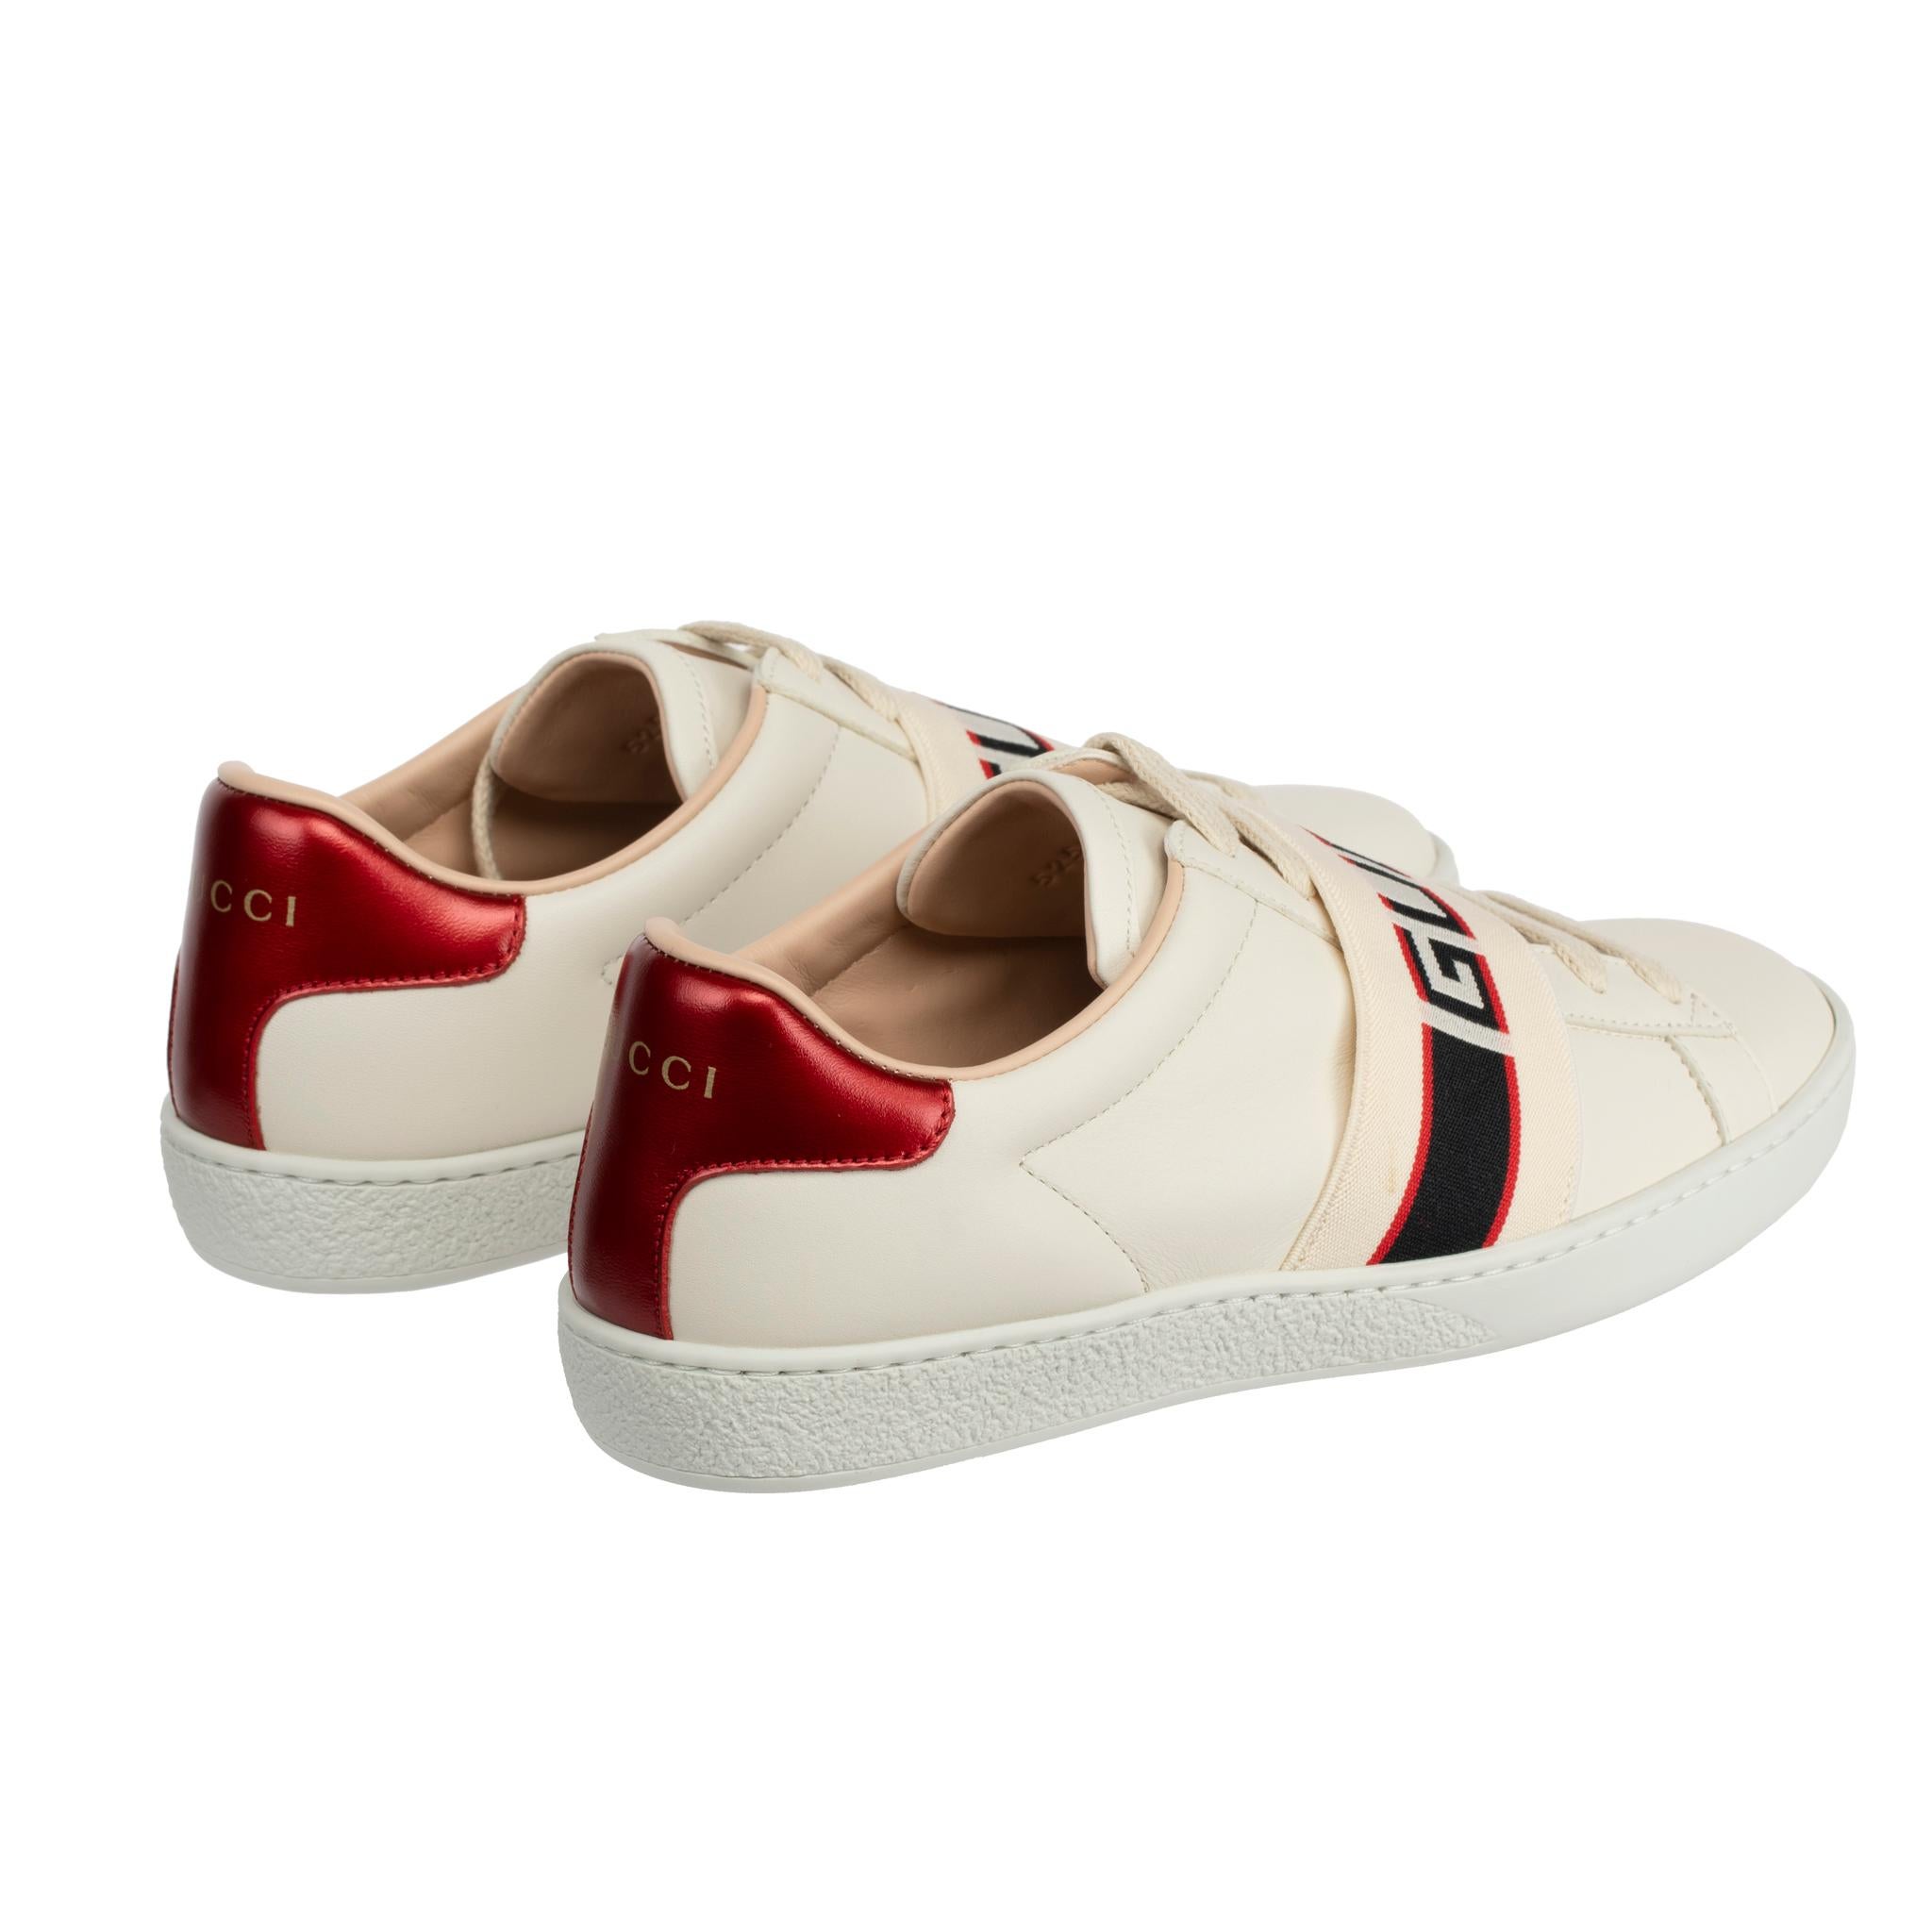 
Brand:

Gucci

Product:

Ace Sneakers With Gucci Logo Strap

Size:

35.5 It

Colour:

Off-White & Metallic Red

Material:

Smooth Leather

Condition:

Pristine; New Or Never Worn

Accompanied By:

Gucci Box, Two Gucci Dustbags, Tag & Card
